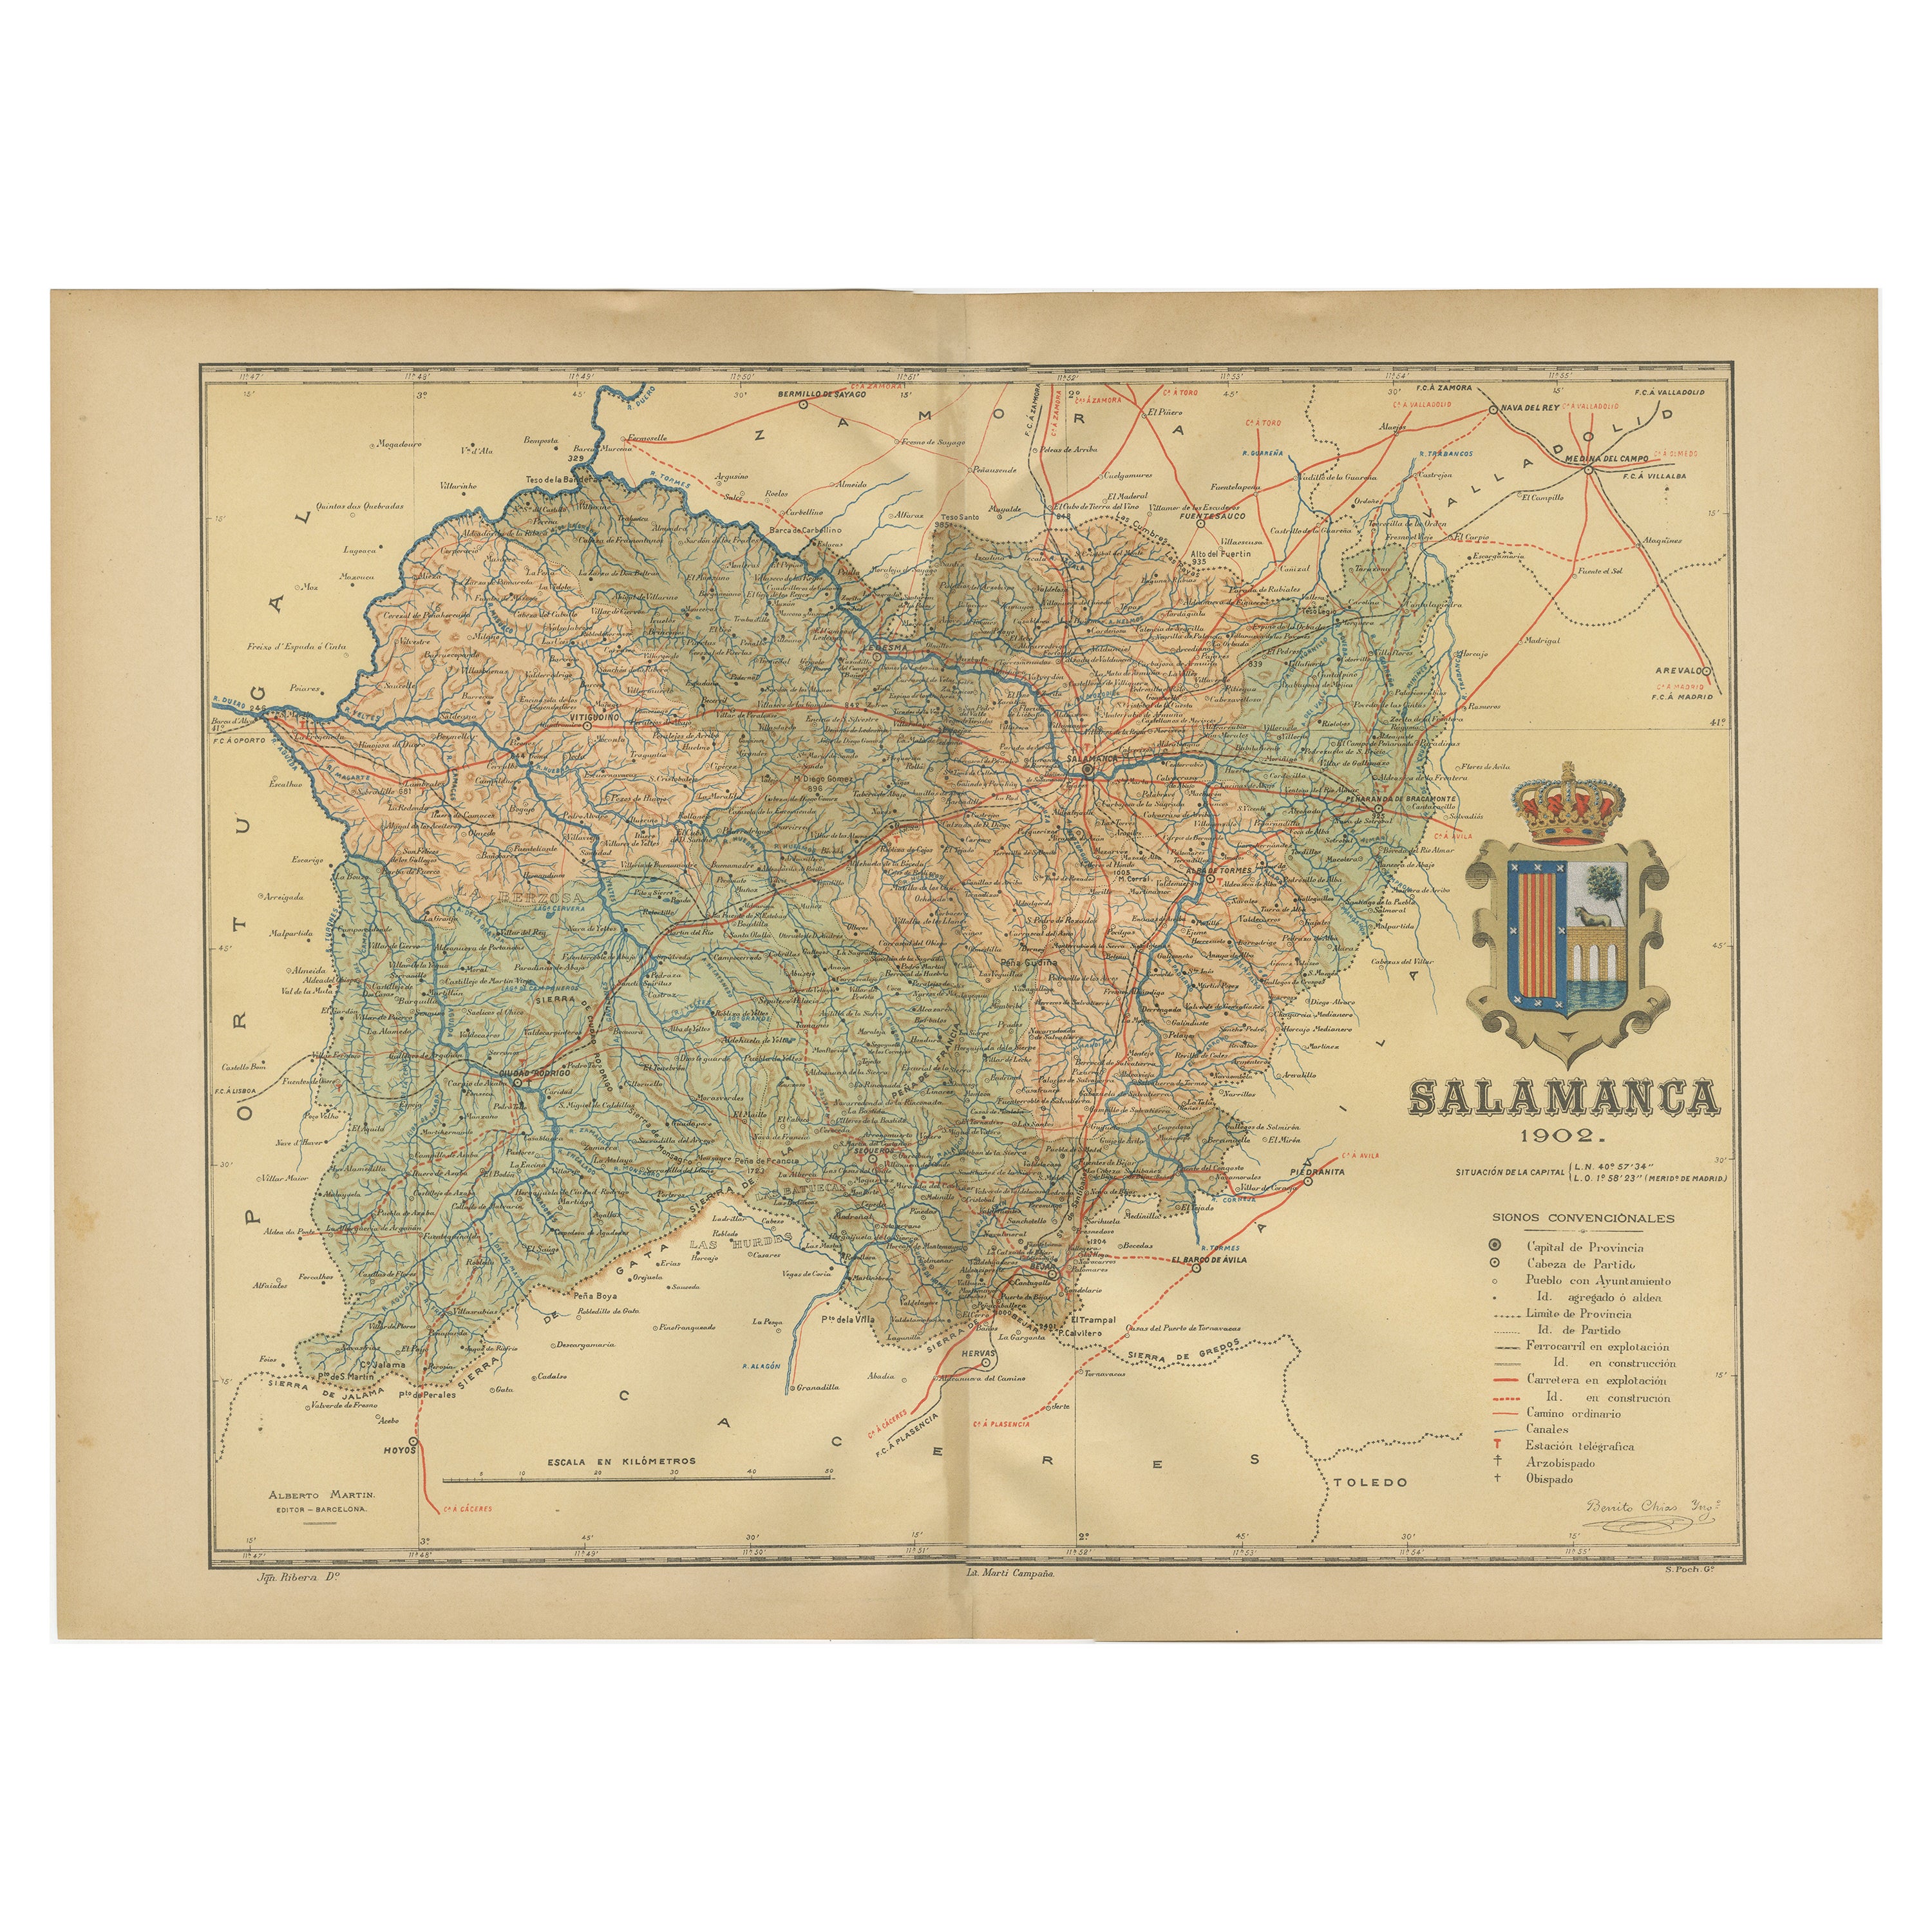 1902 Cartographic View of Salamanca: The Golden Province of Spain For Sale